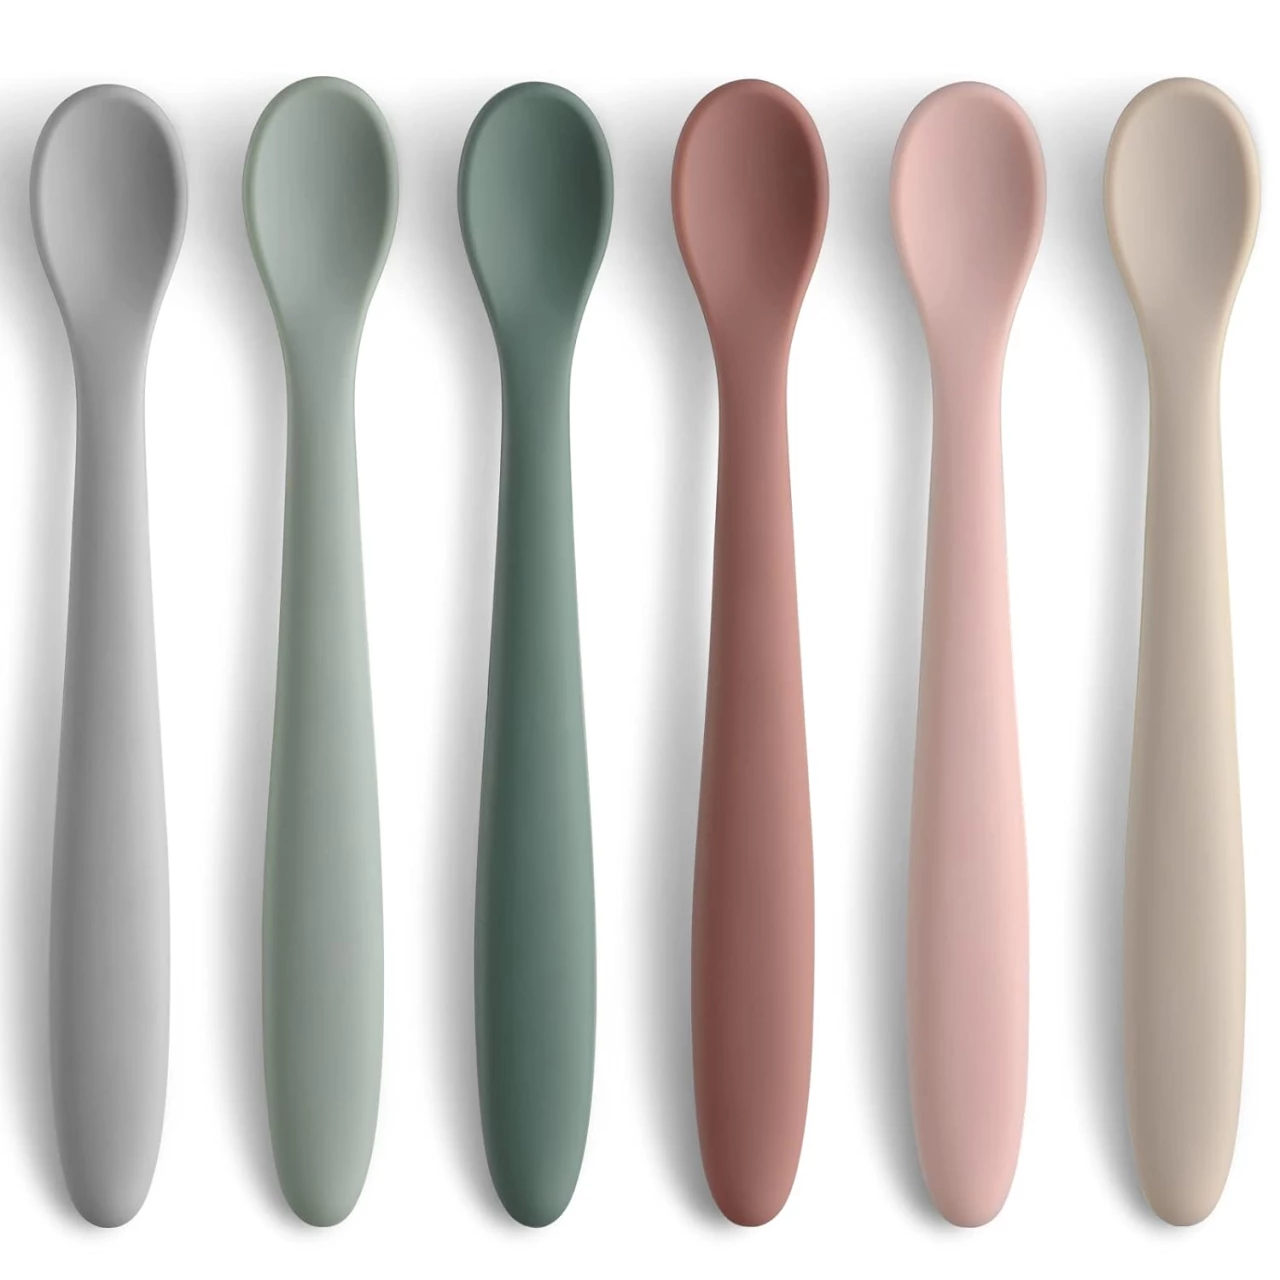 6-Piece Silicone Feeding Spoons for First Stage Baby and Infant